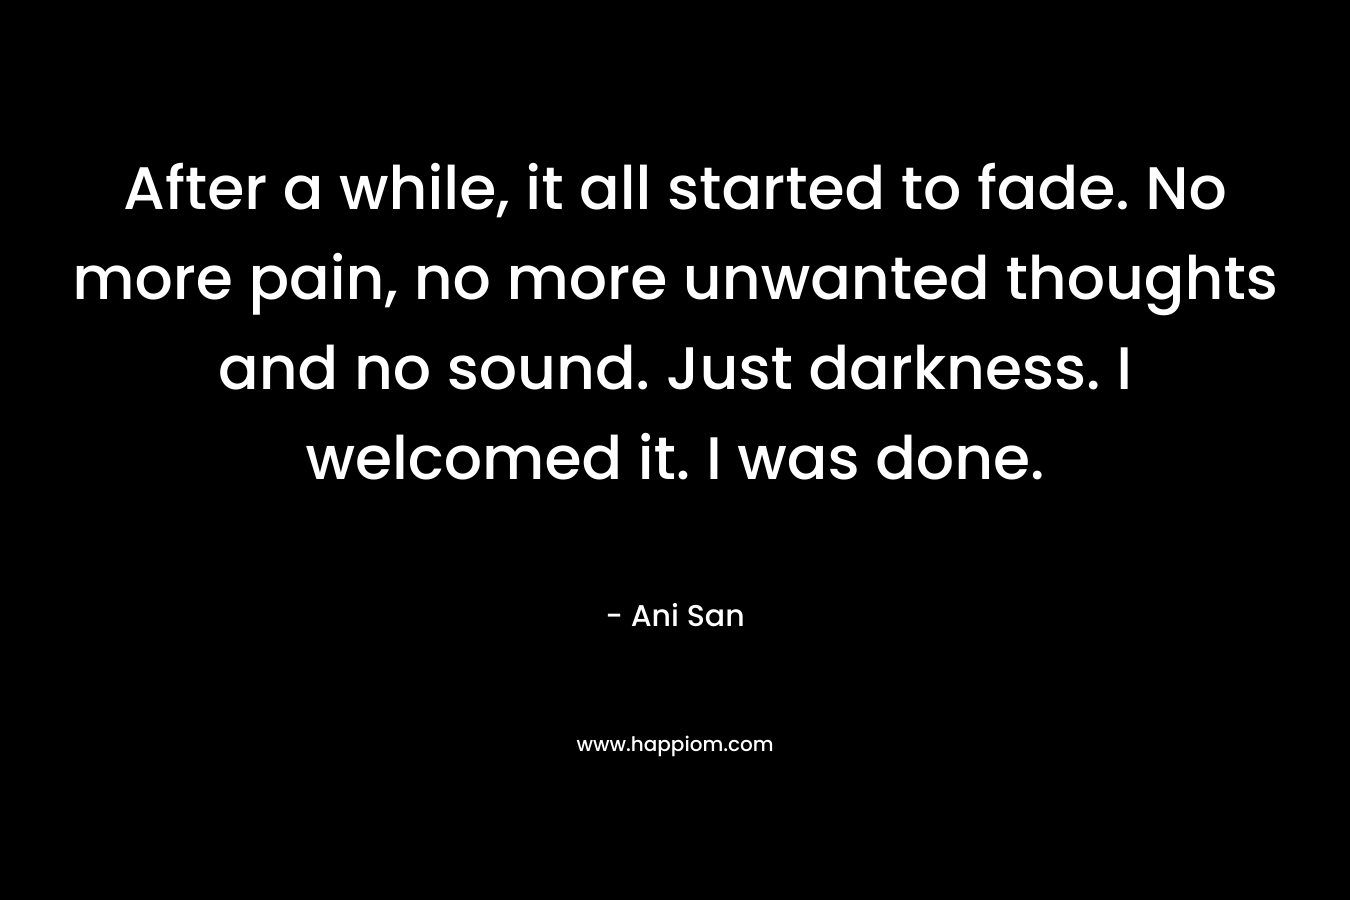 After a while, it all started to fade. No more pain, no more unwanted thoughts and no sound. Just darkness. I welcomed it. I was done. – Ani San